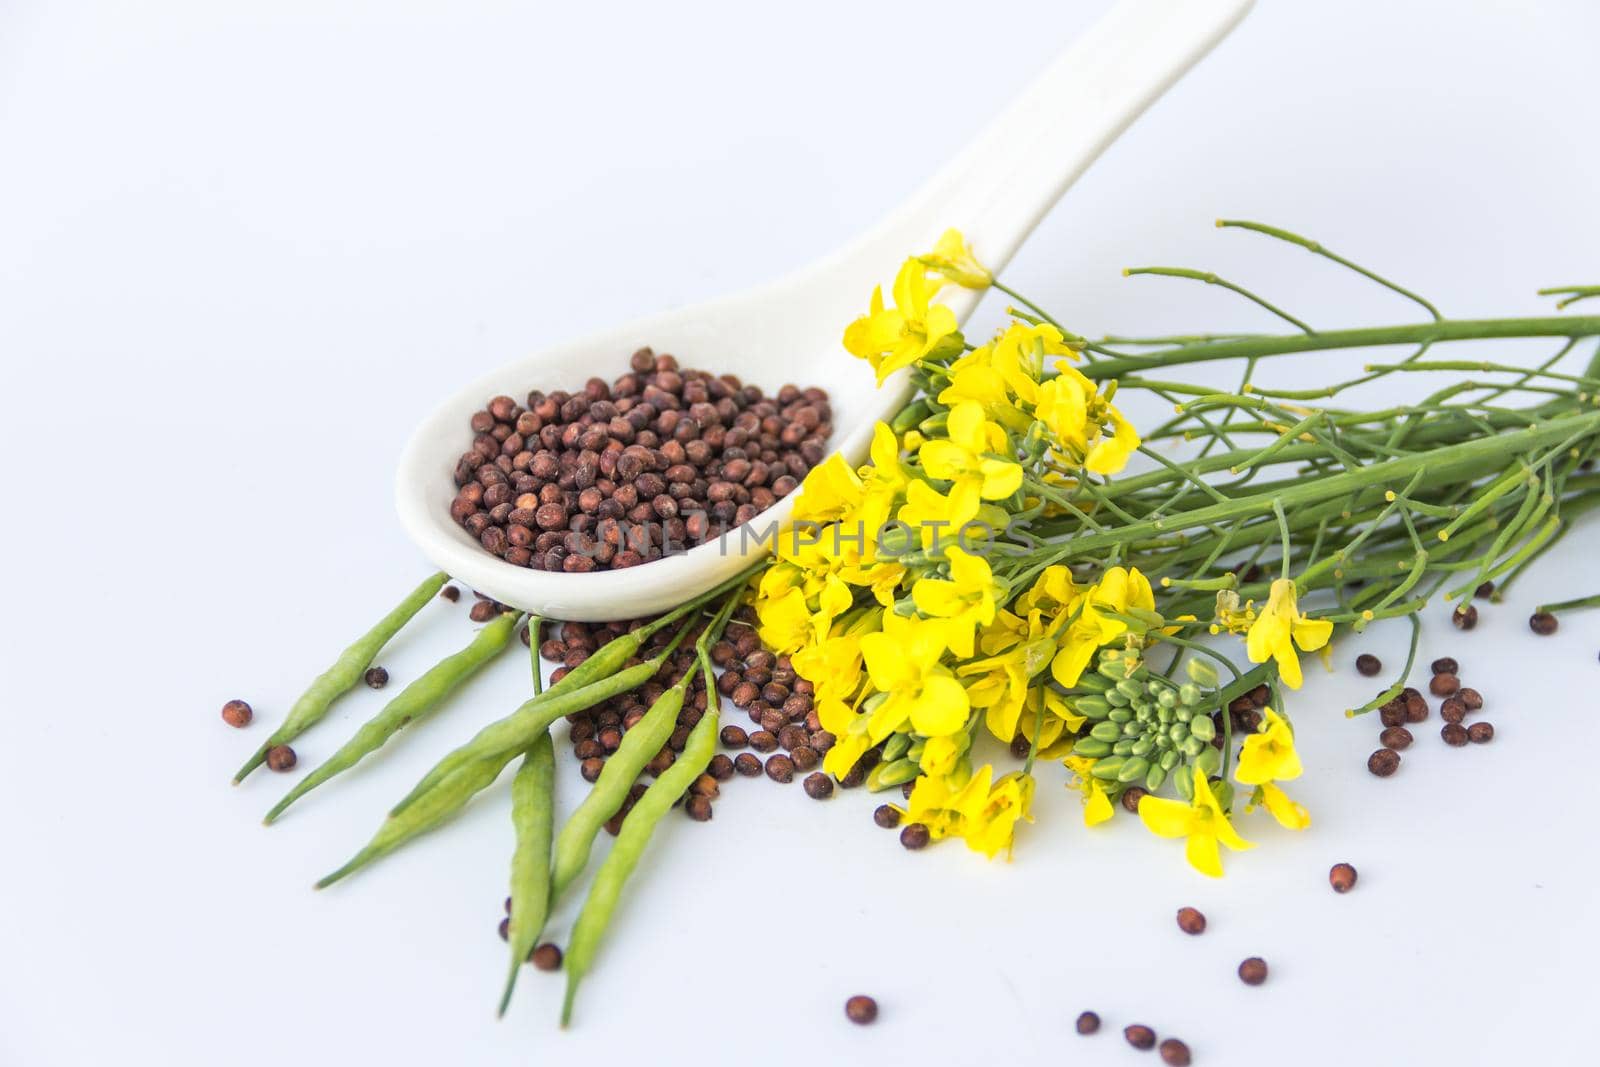 rapeseed seeds and flowers on white background by GabrielaBertolini